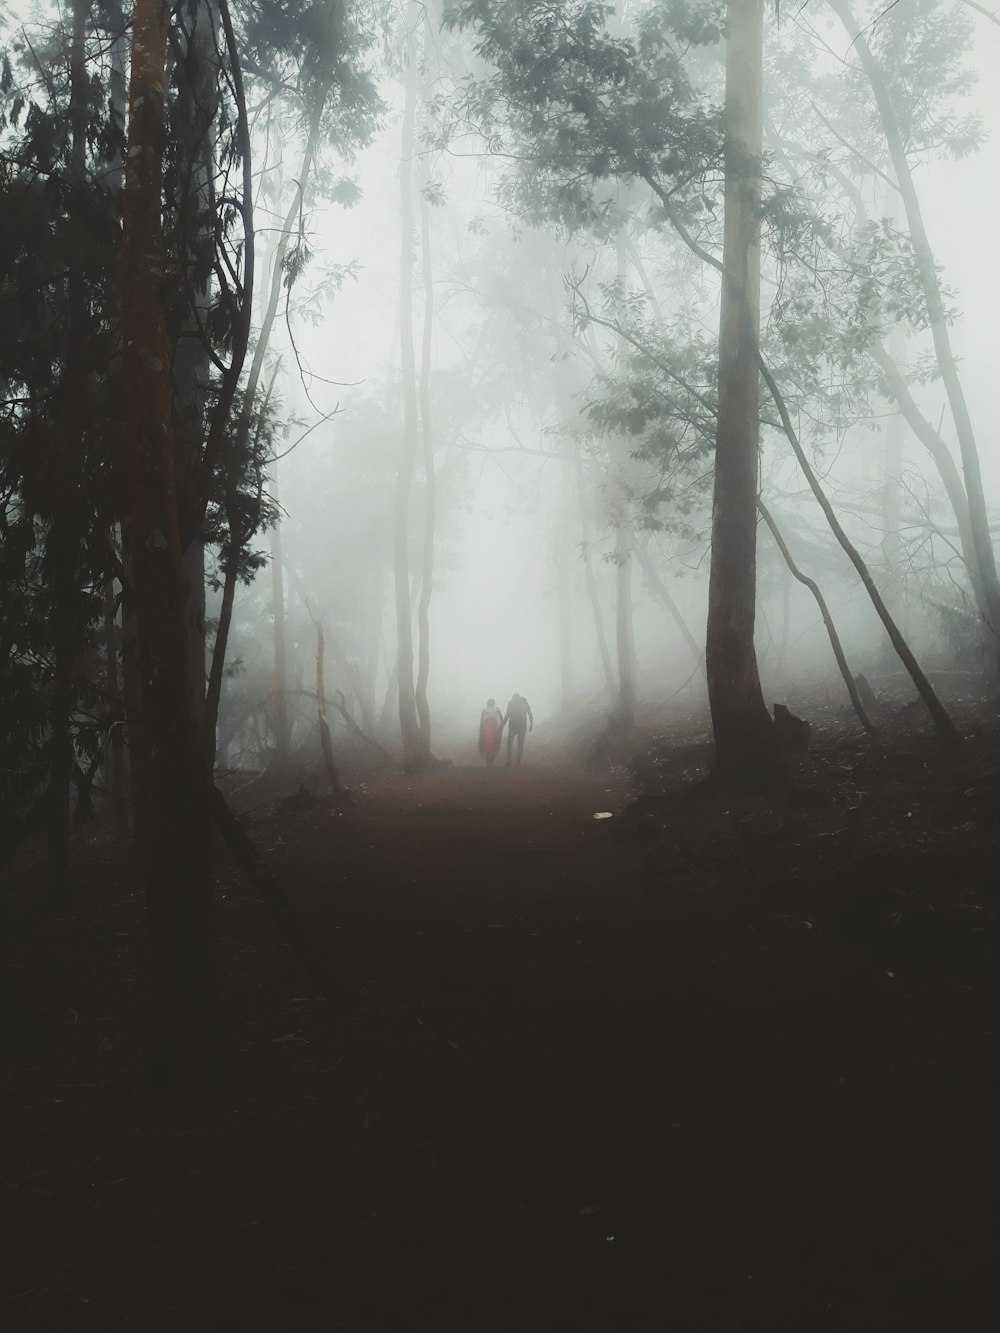 two people are walking through a foggy forest